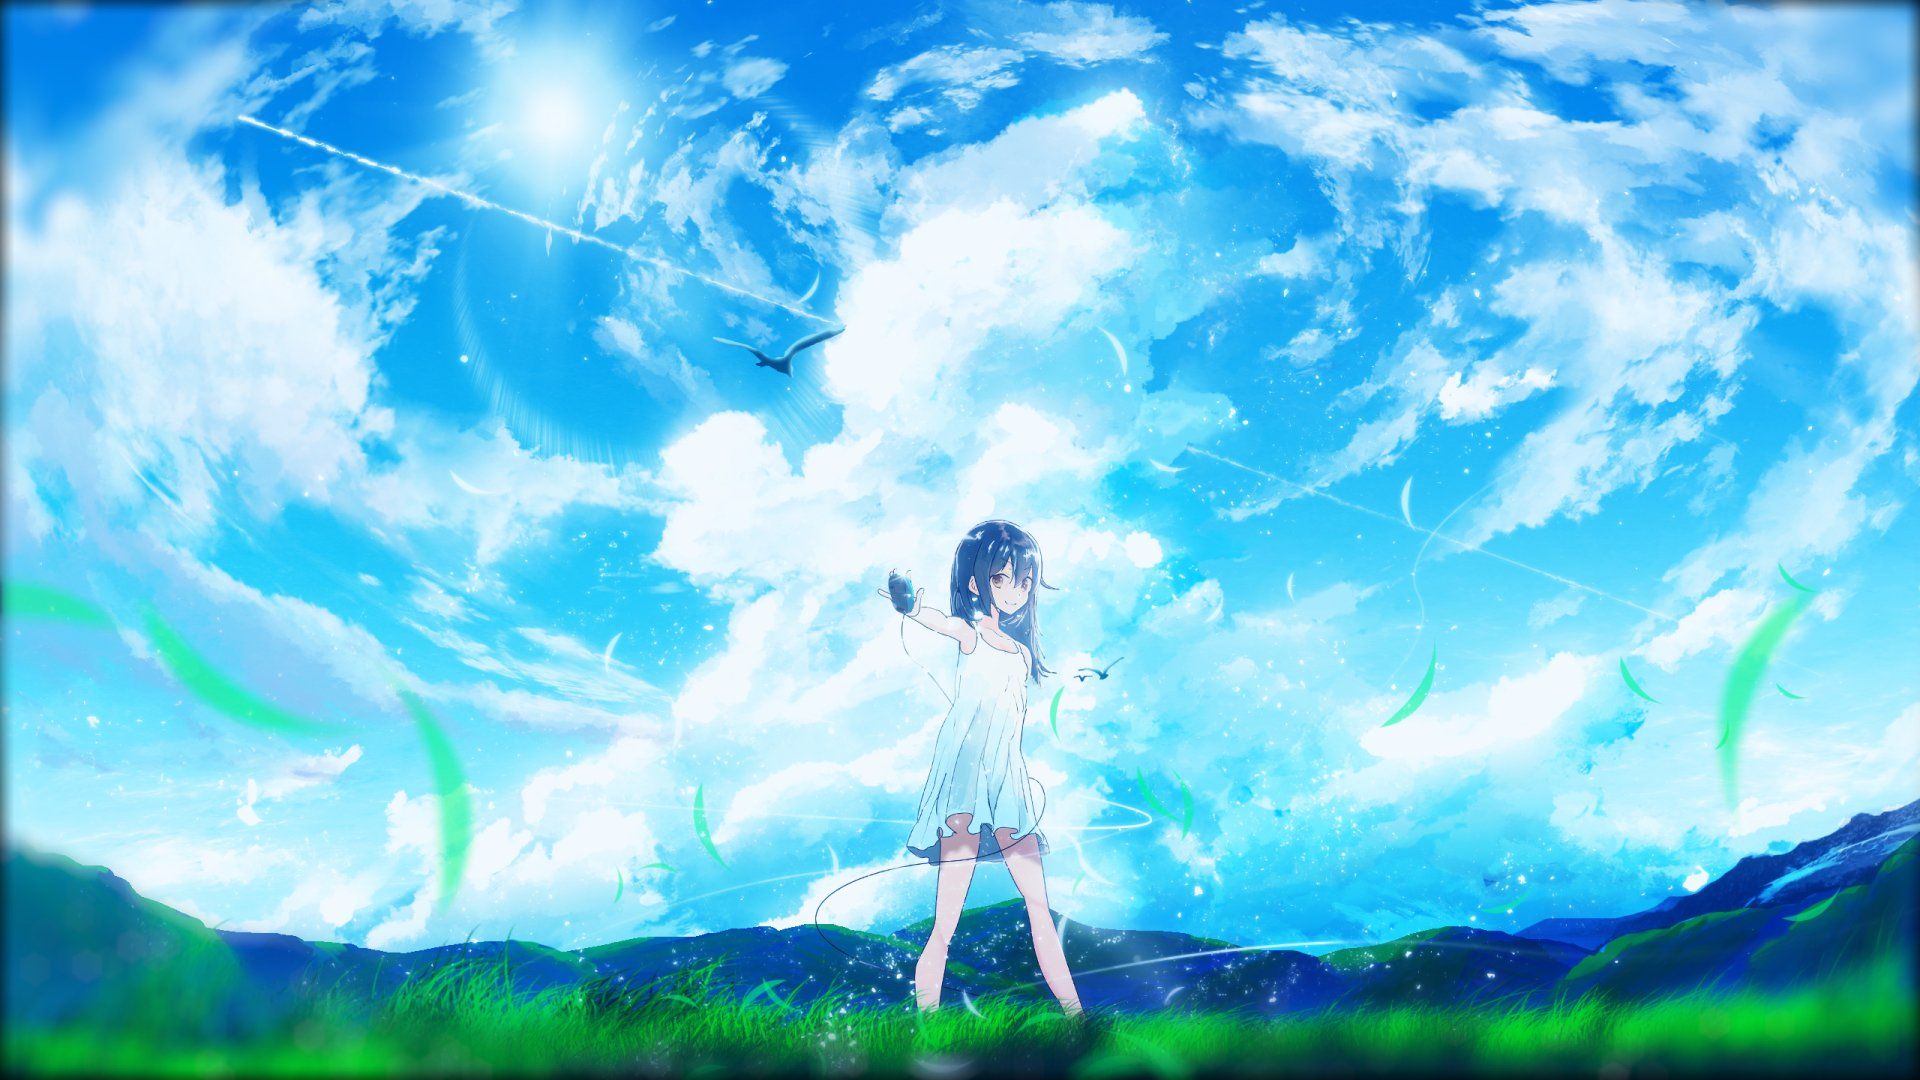 Download wallpaper Sky Anime Night Scenery section art in resolution  2560x1440